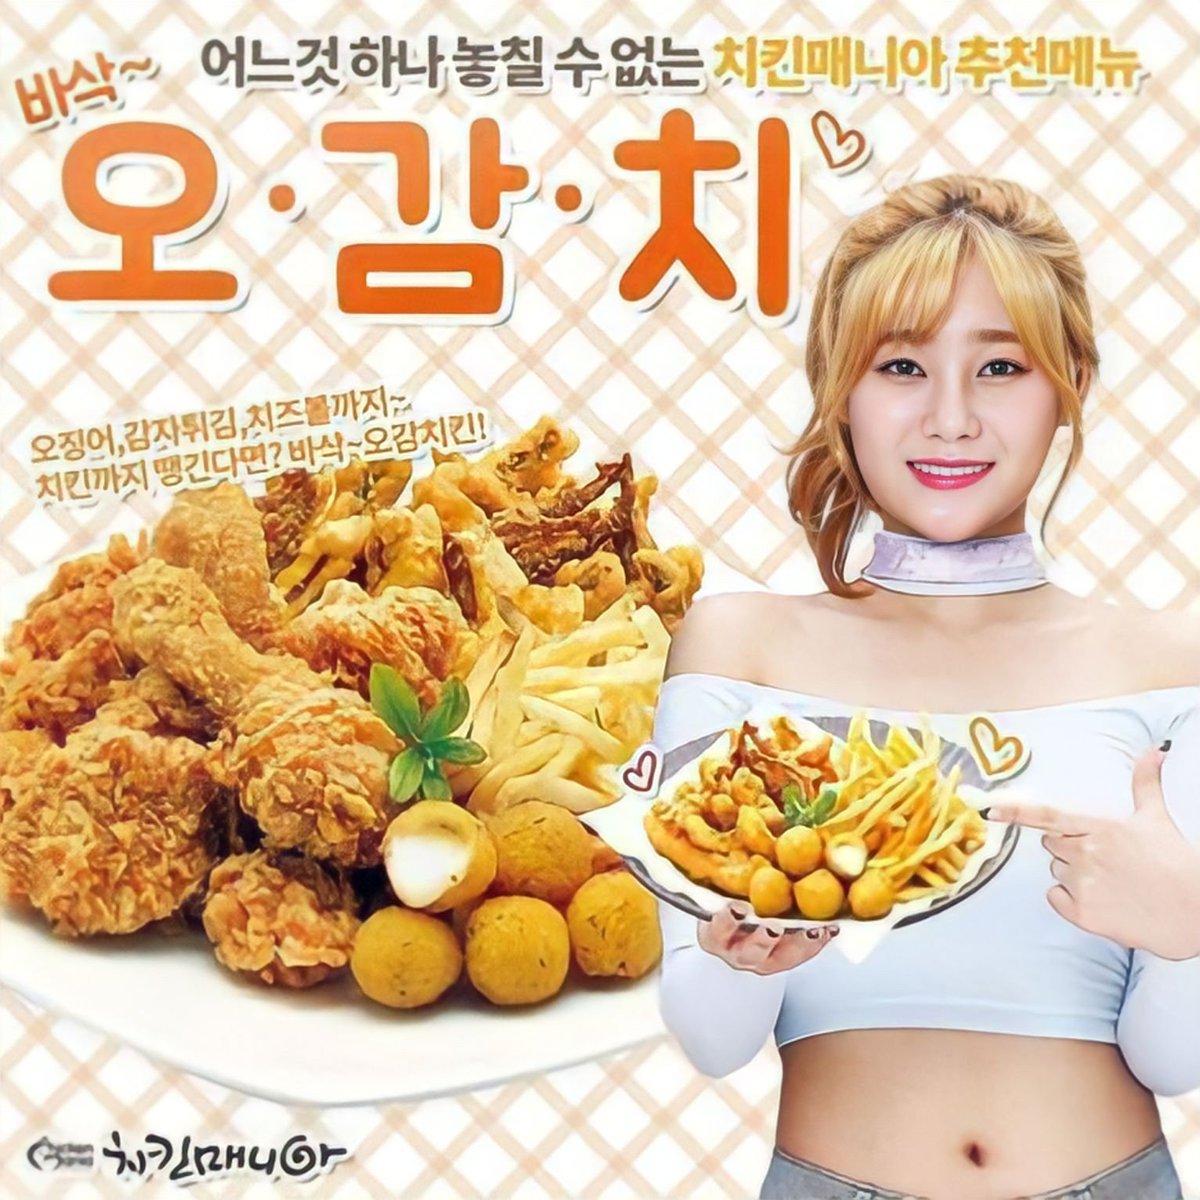 ꧁𝕎𝕖𝕕𝕟𝕖𝕤𝕕𝕒𝕪: #𝕊𝕖𝕠𝕐𝕦𝕟𝕒 ꧂
Ads from #AoA x #ChickenMania 🐥 🍗😋